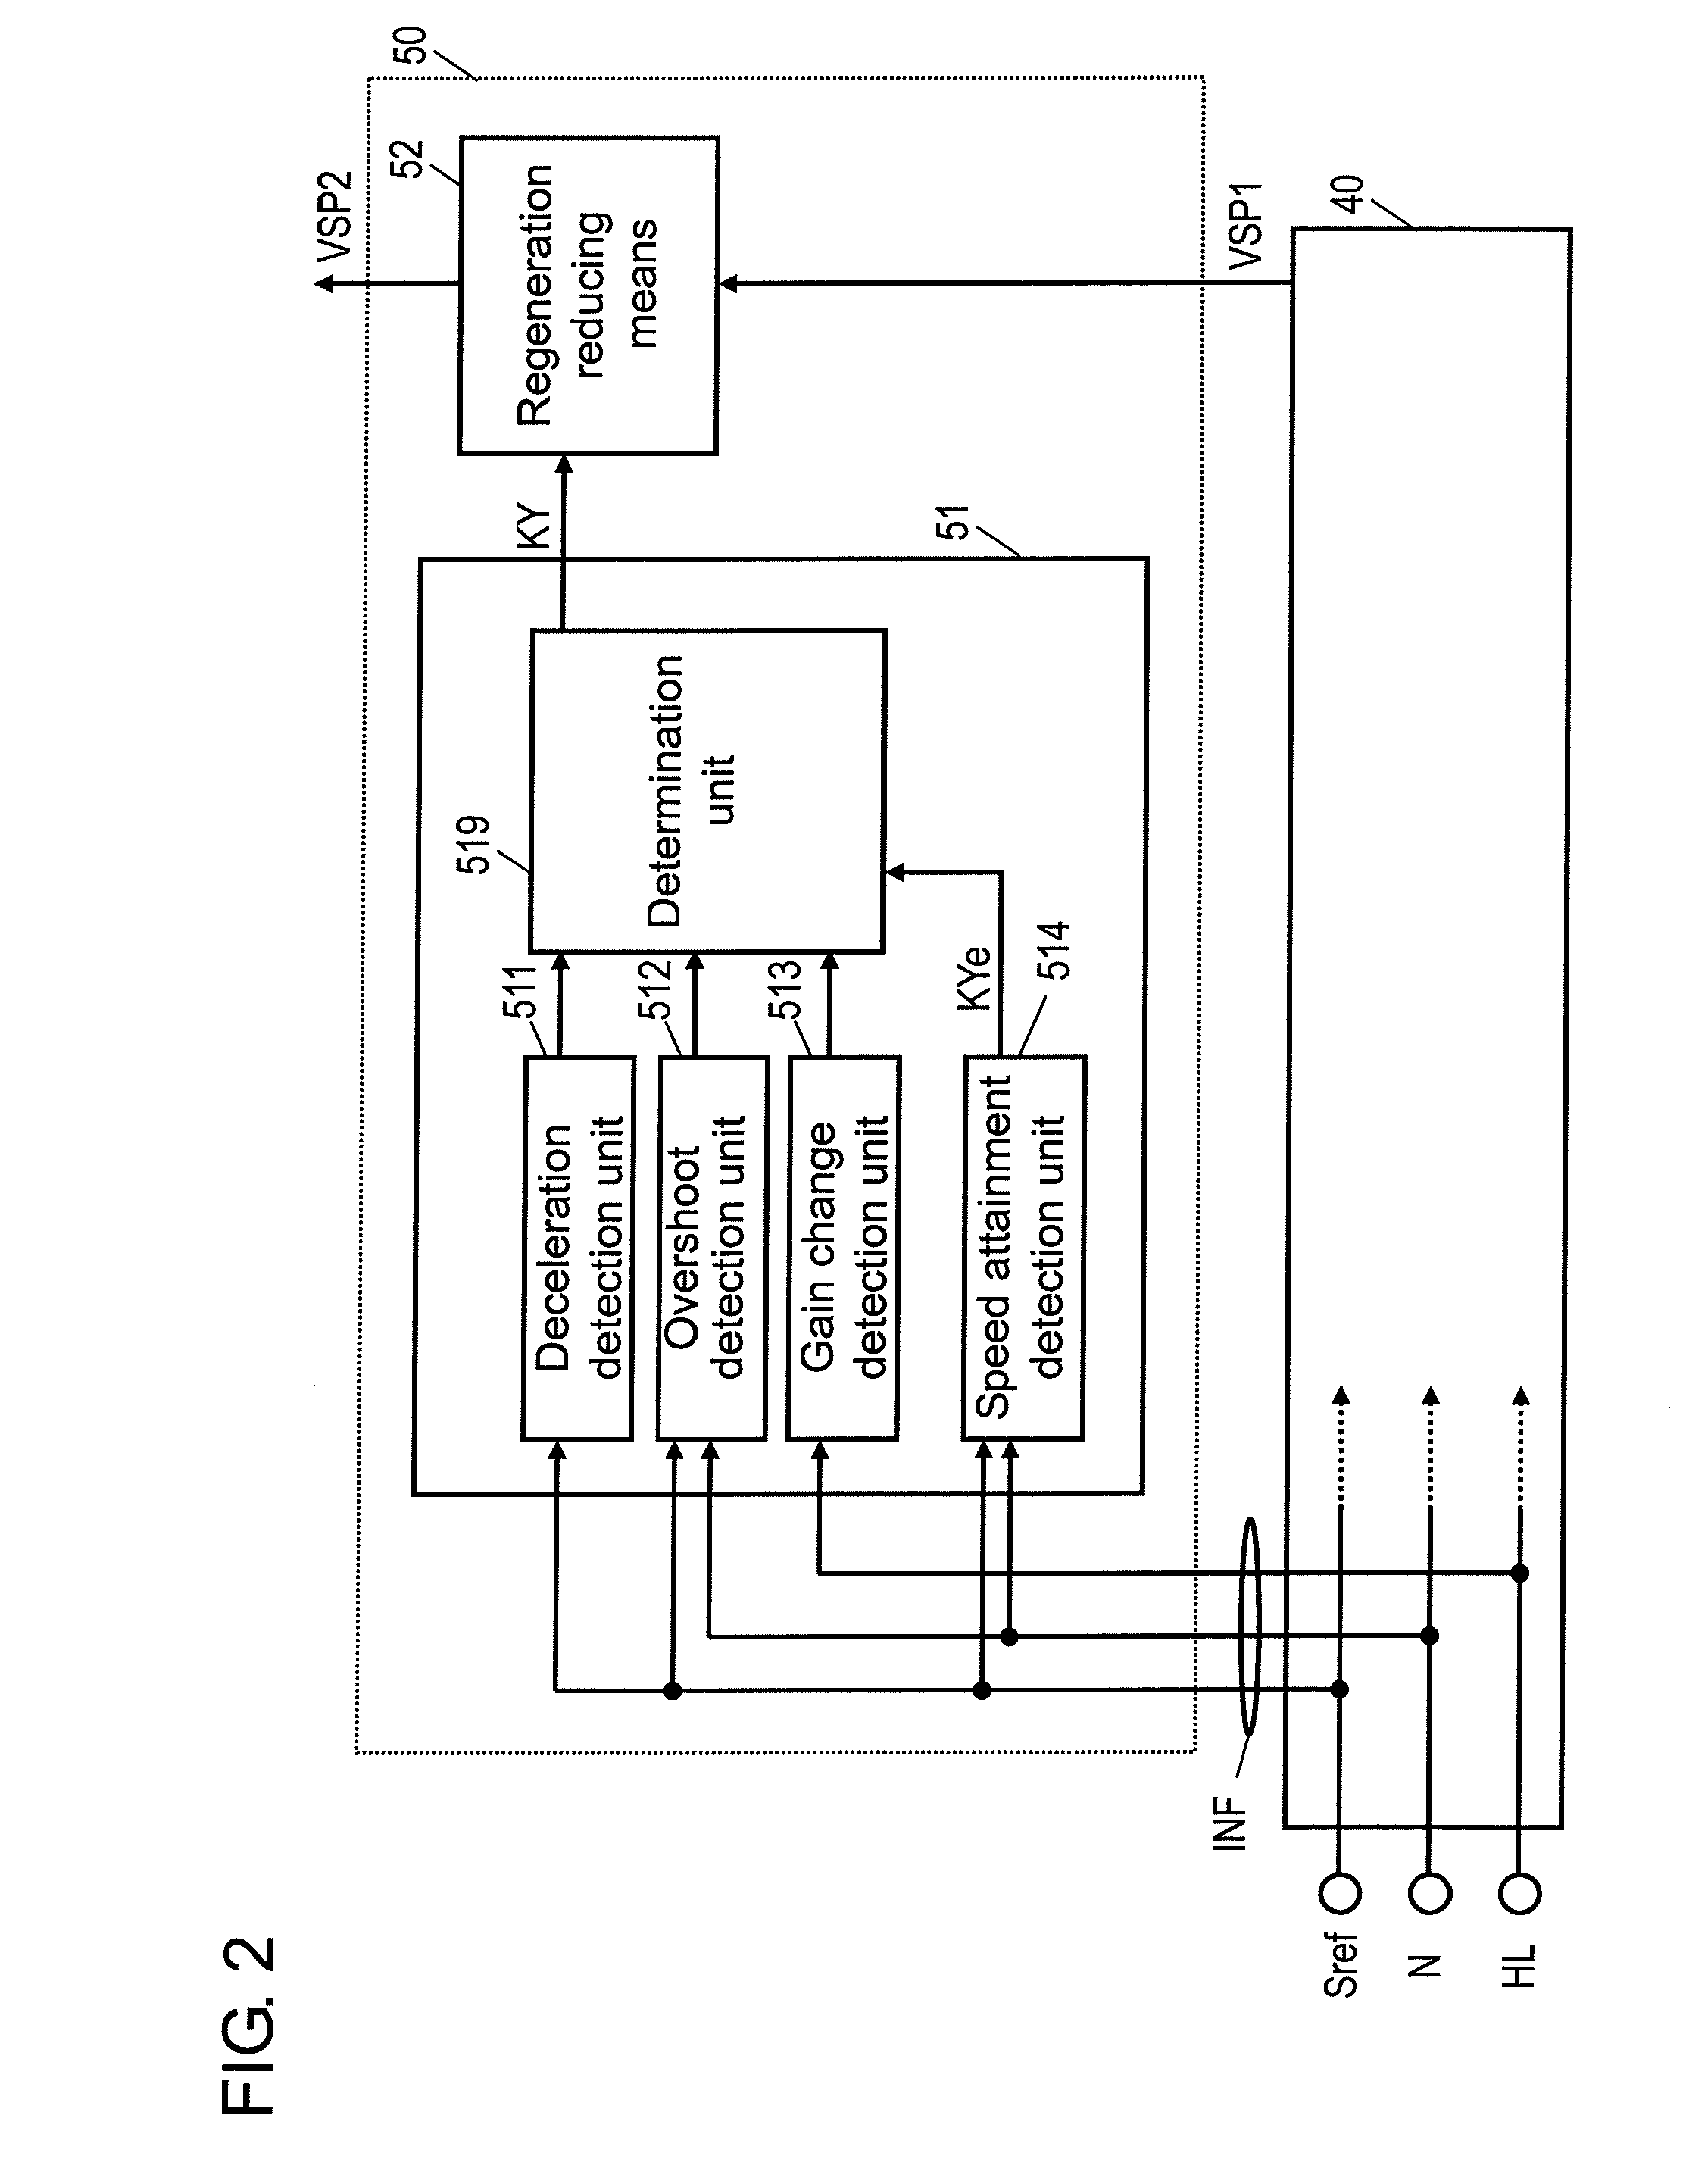 Motor driving device, motor device, and integrated circuit device